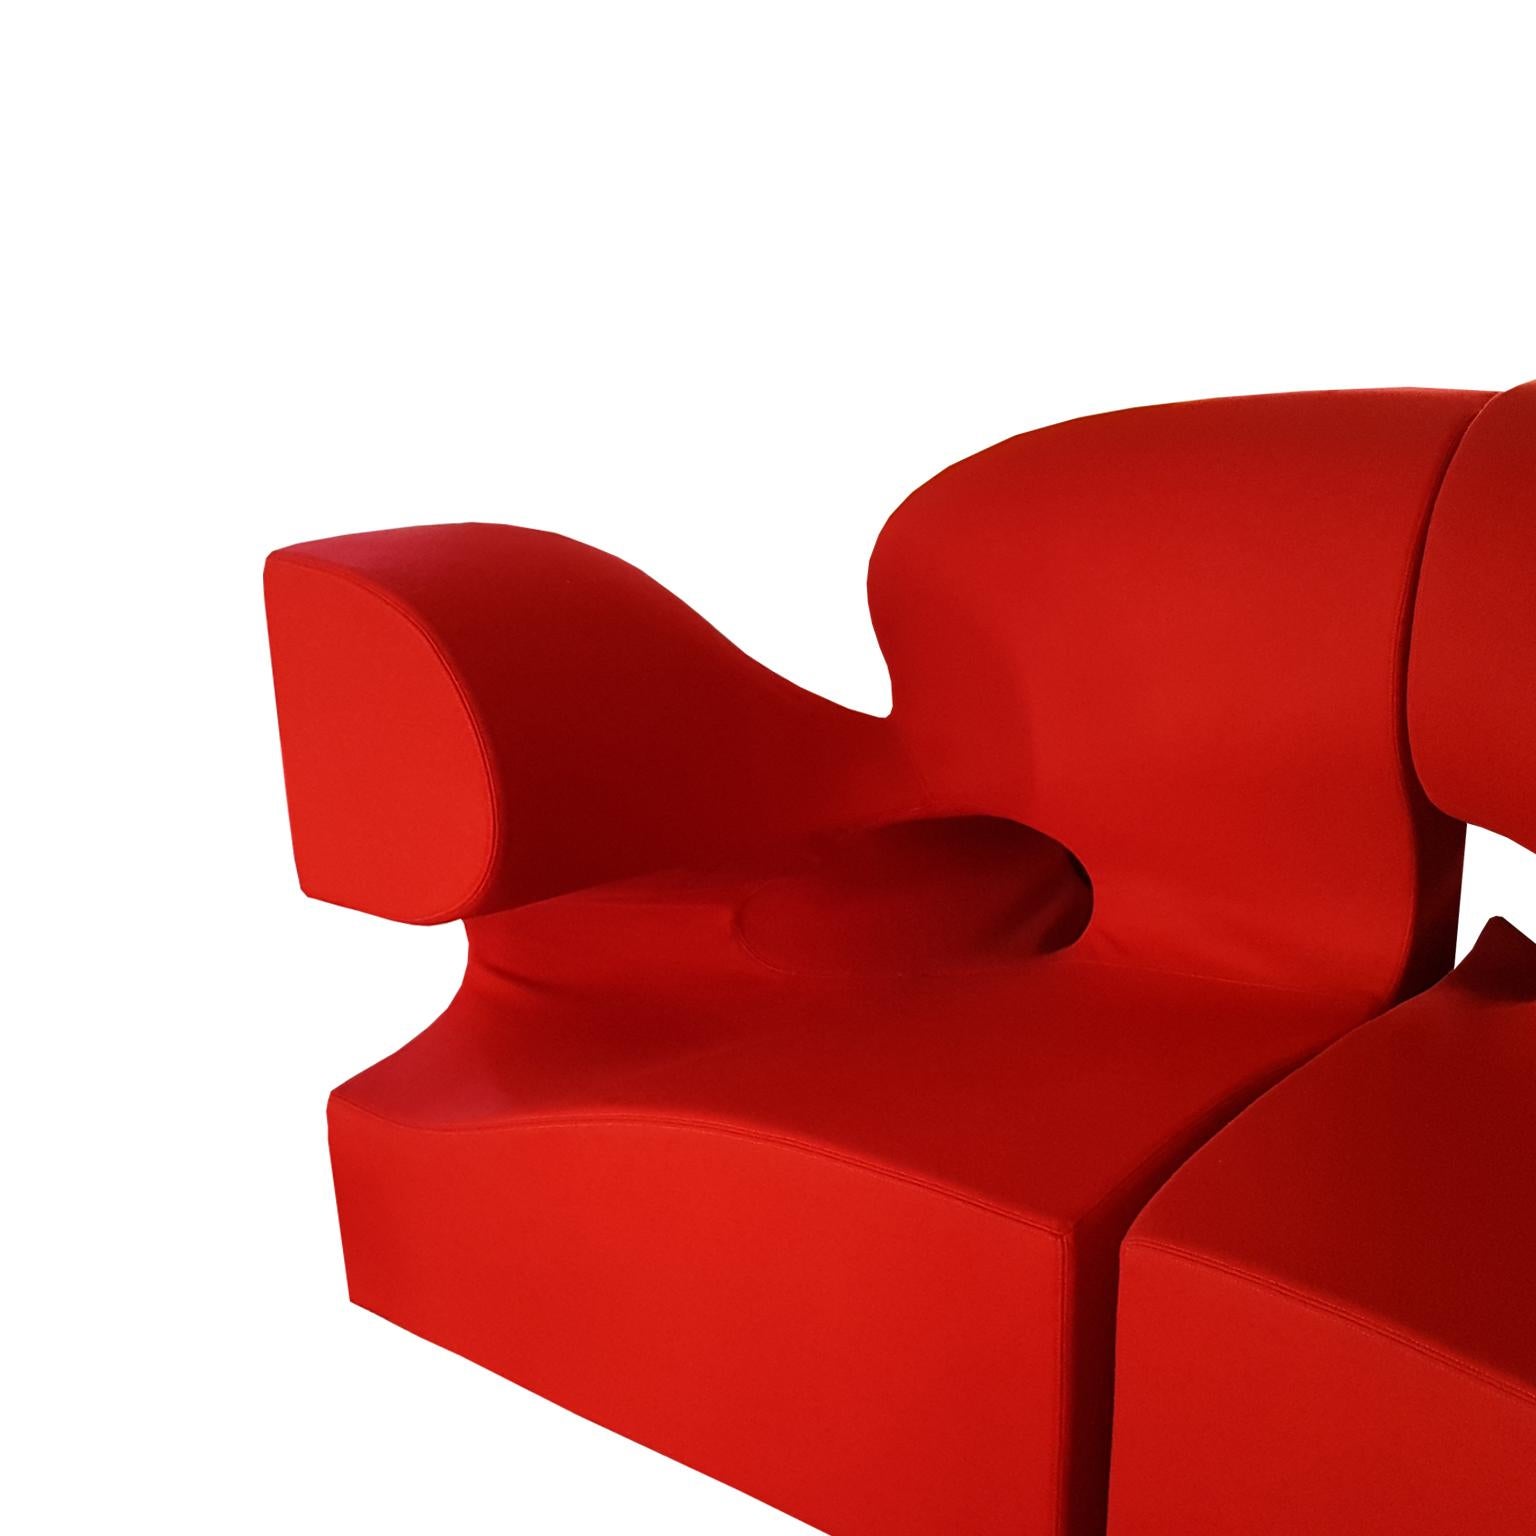 Steel Contemporary Italian Moroso Modular Sofa with Red Wool Upholstery by Ron Arad For Sale